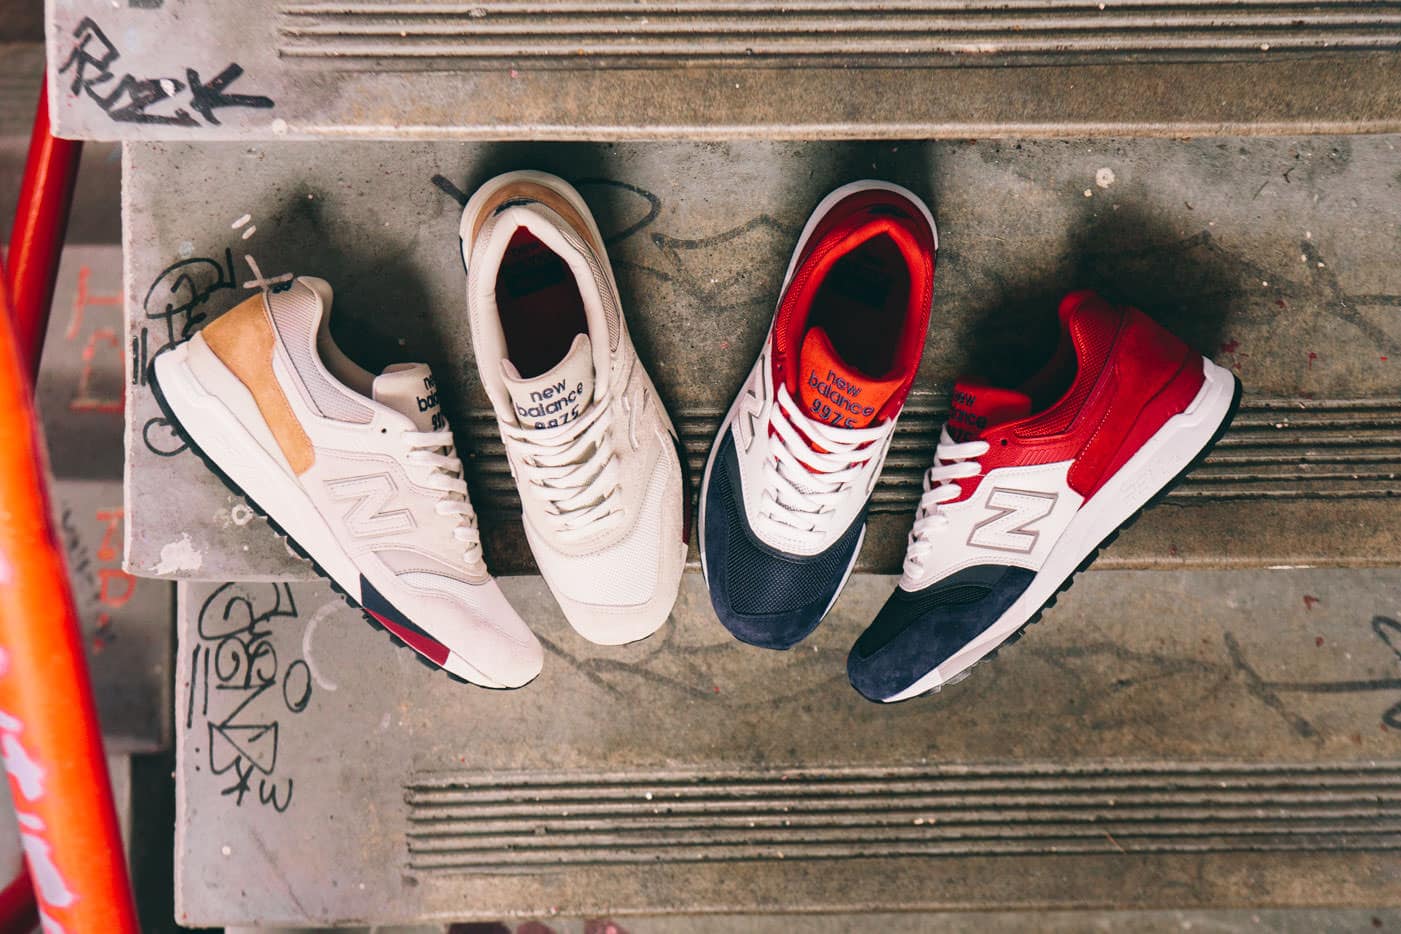 New Balance 997 5 Red White Blue Pack